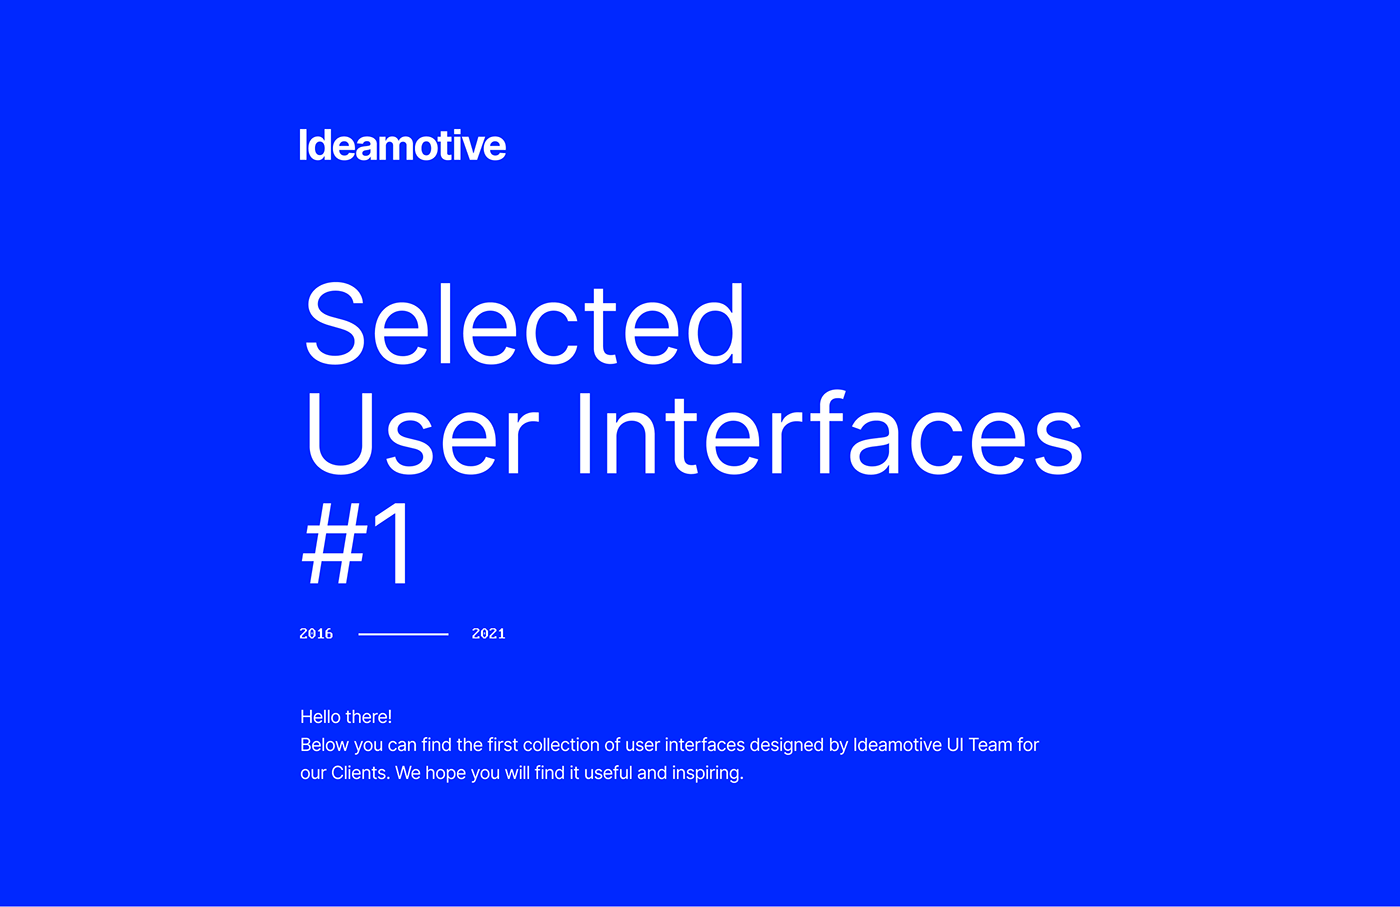 Ideamotive. Selected User Interfaces